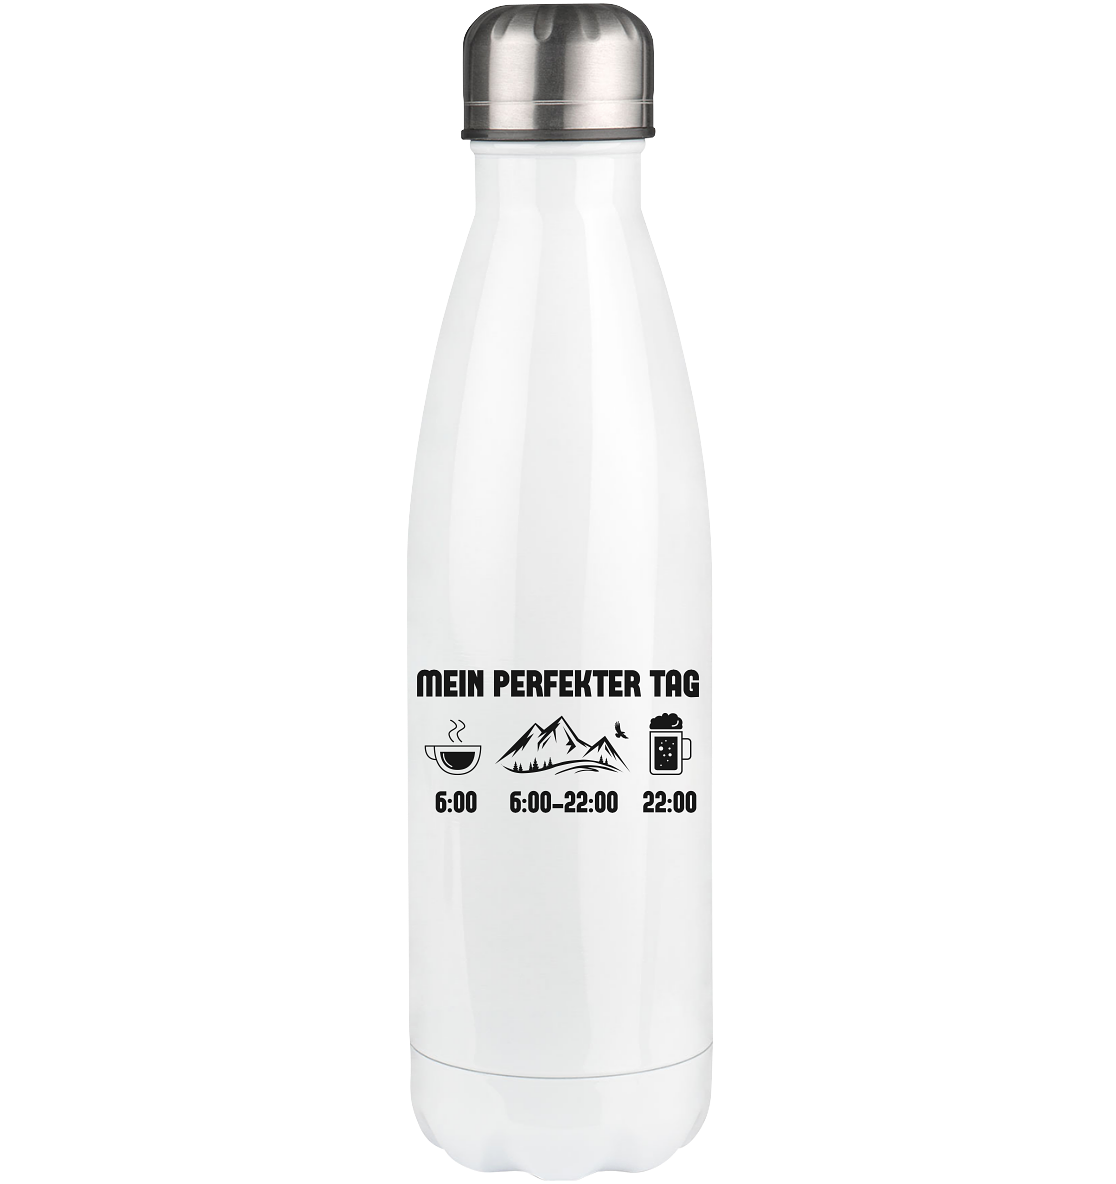 Mein Perfekter Tag - Edelstahl Thermosflasche berge 500ml